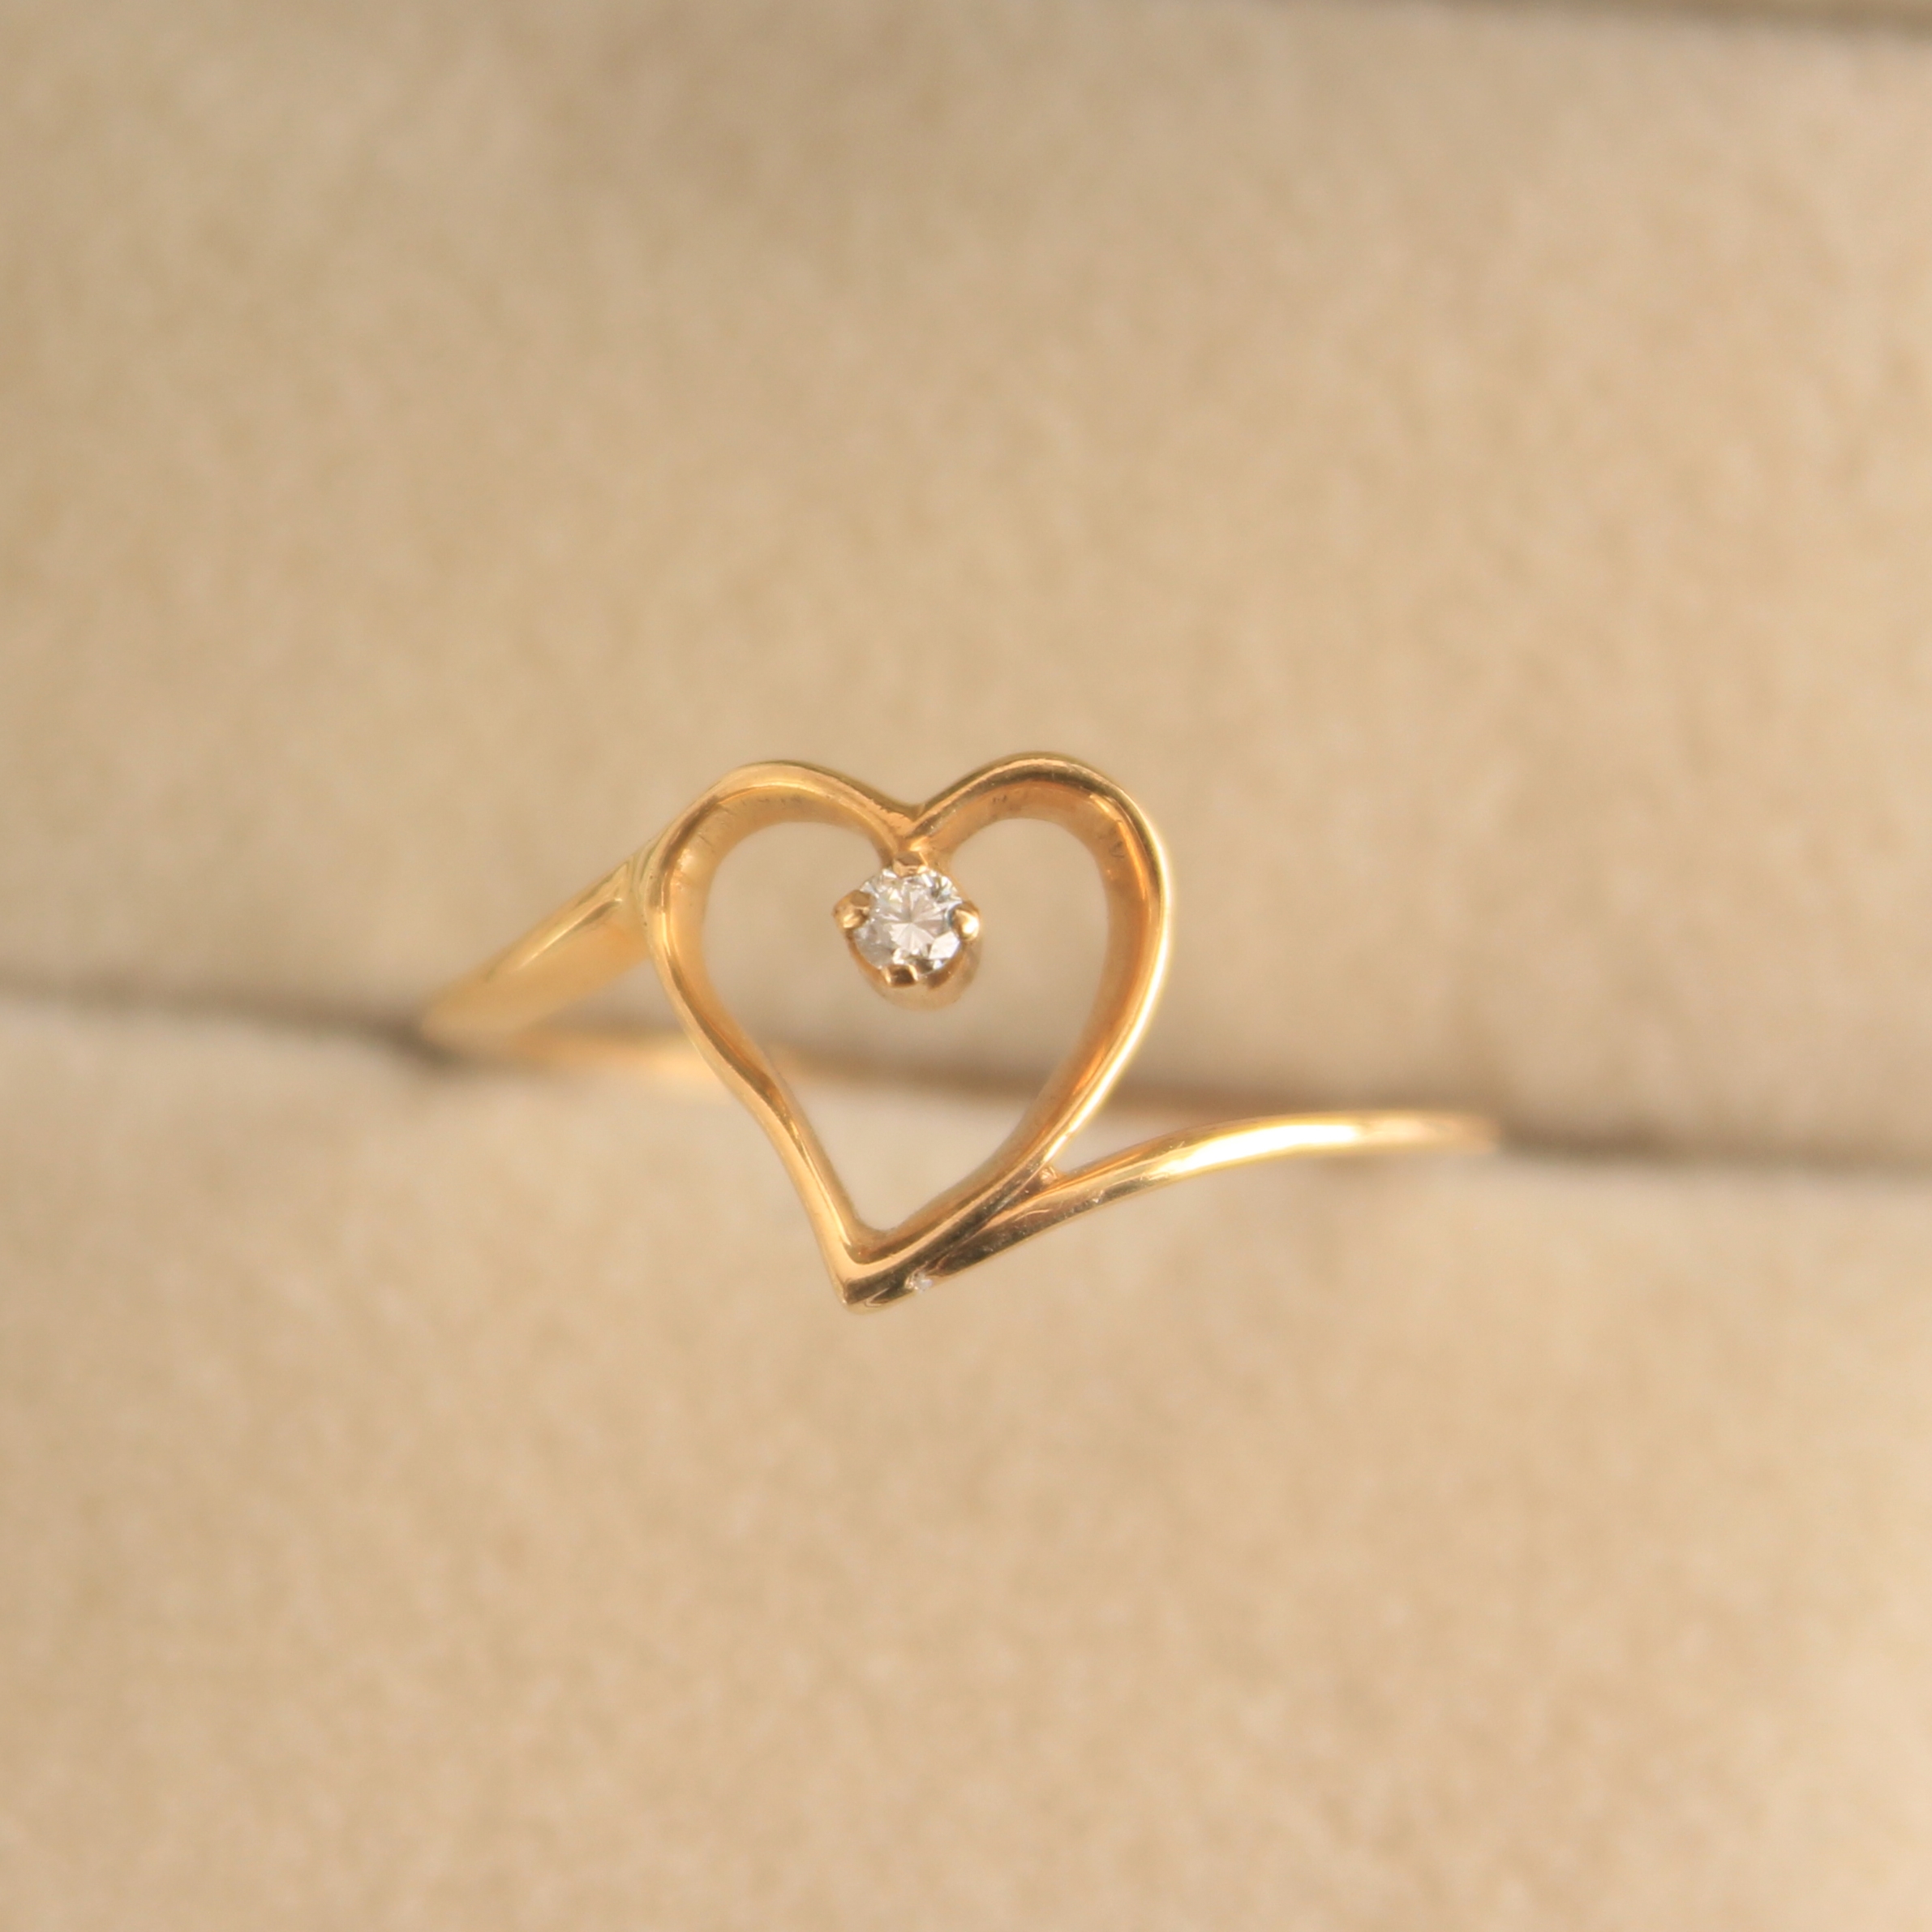 Buy quality Gold 22.k Heart Shape Ladies Ring in Ahmedabad